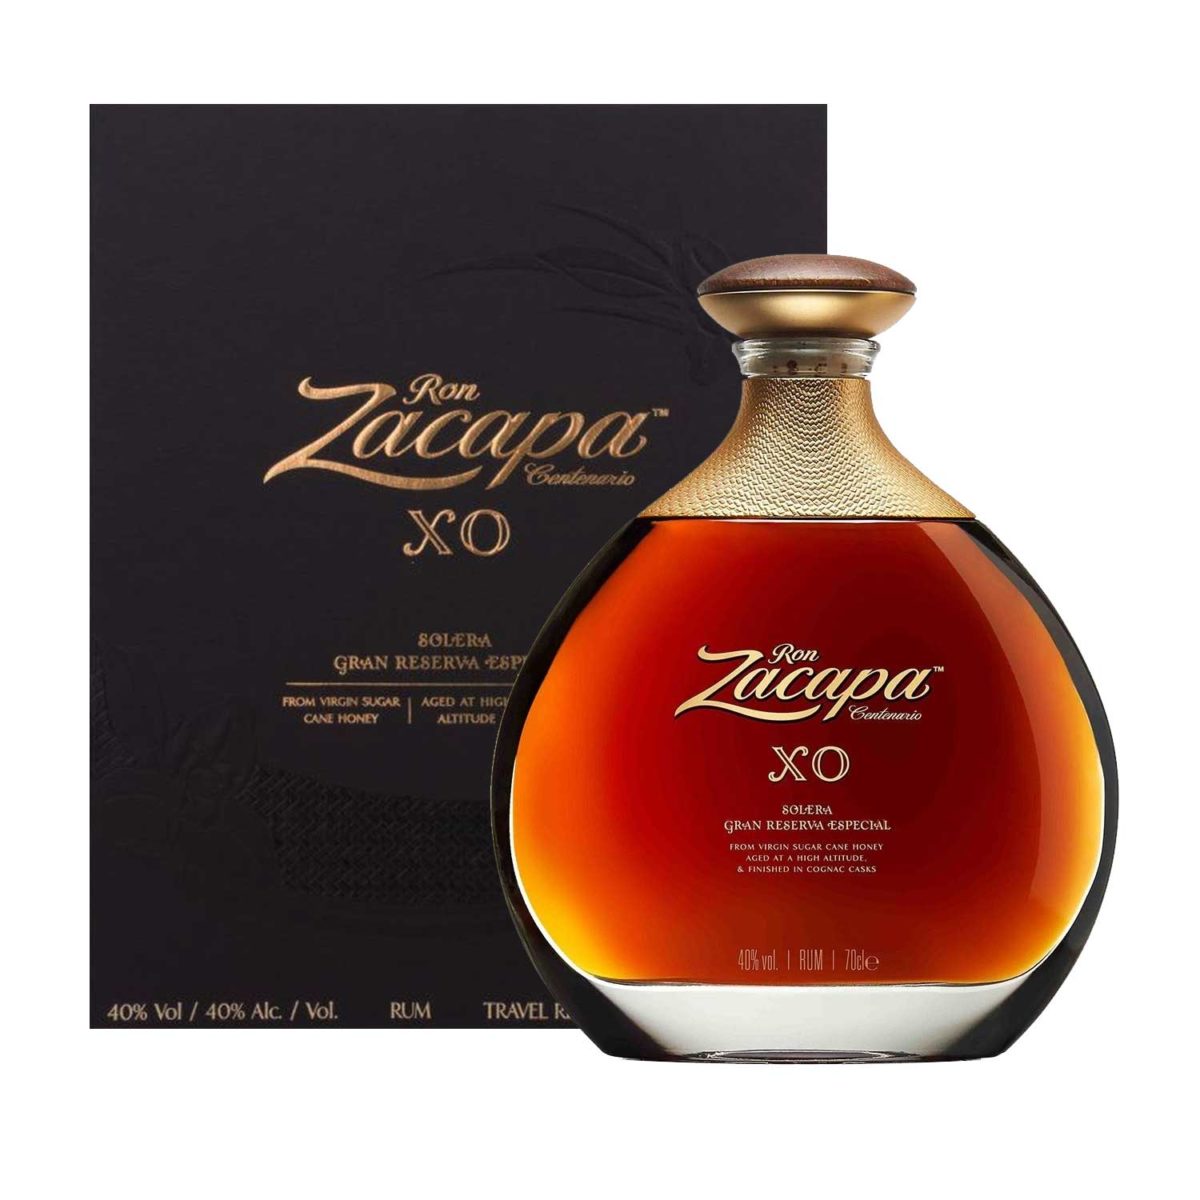 ron zacapa makes some of the best rums in the world